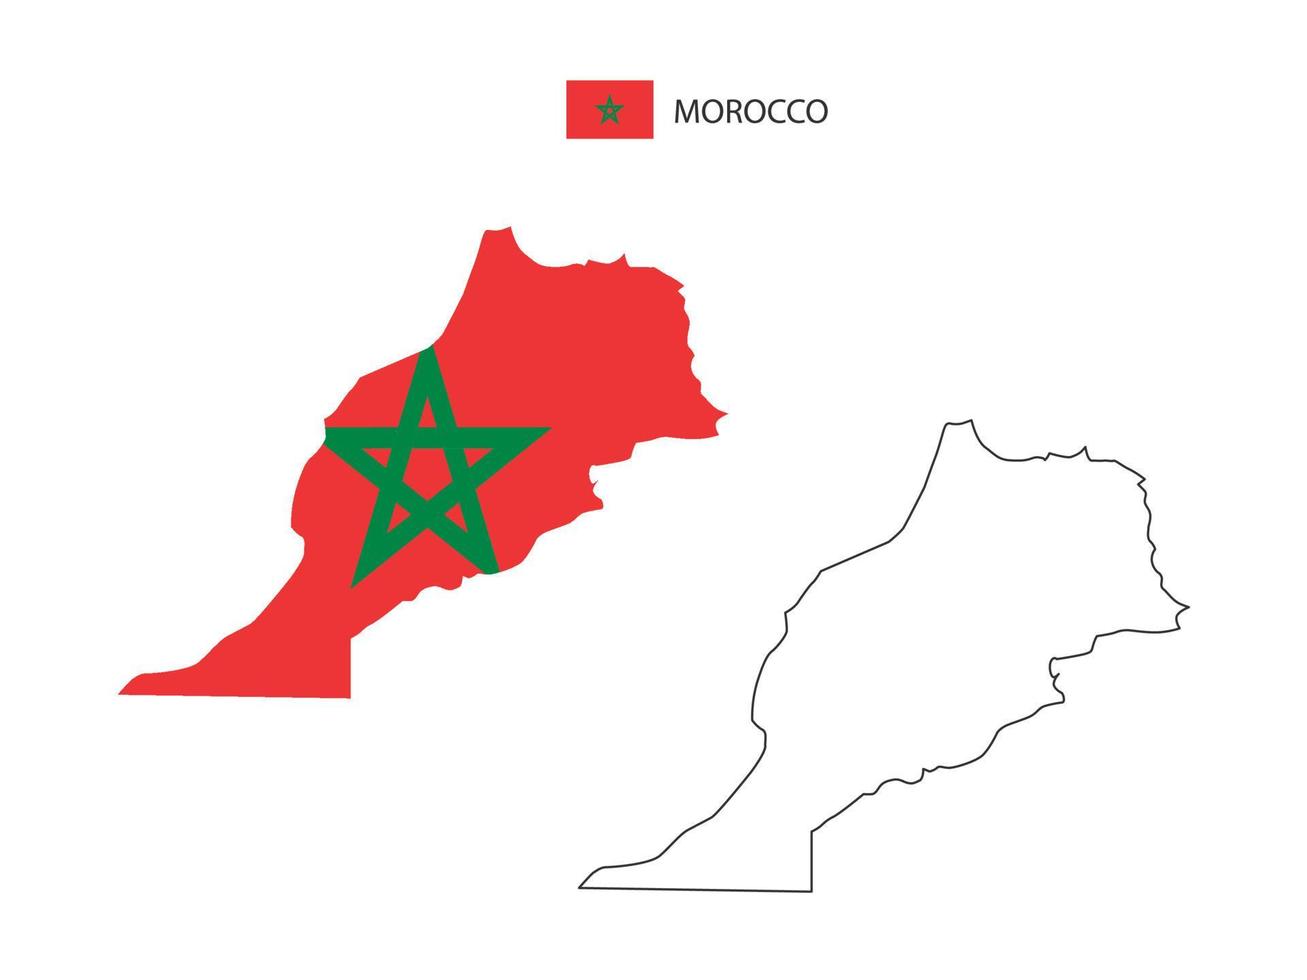 Morocco map city vector divided by outline simplicity style. Have 2 versions, black thin line version and color of country flag version. Both map were on the white background.